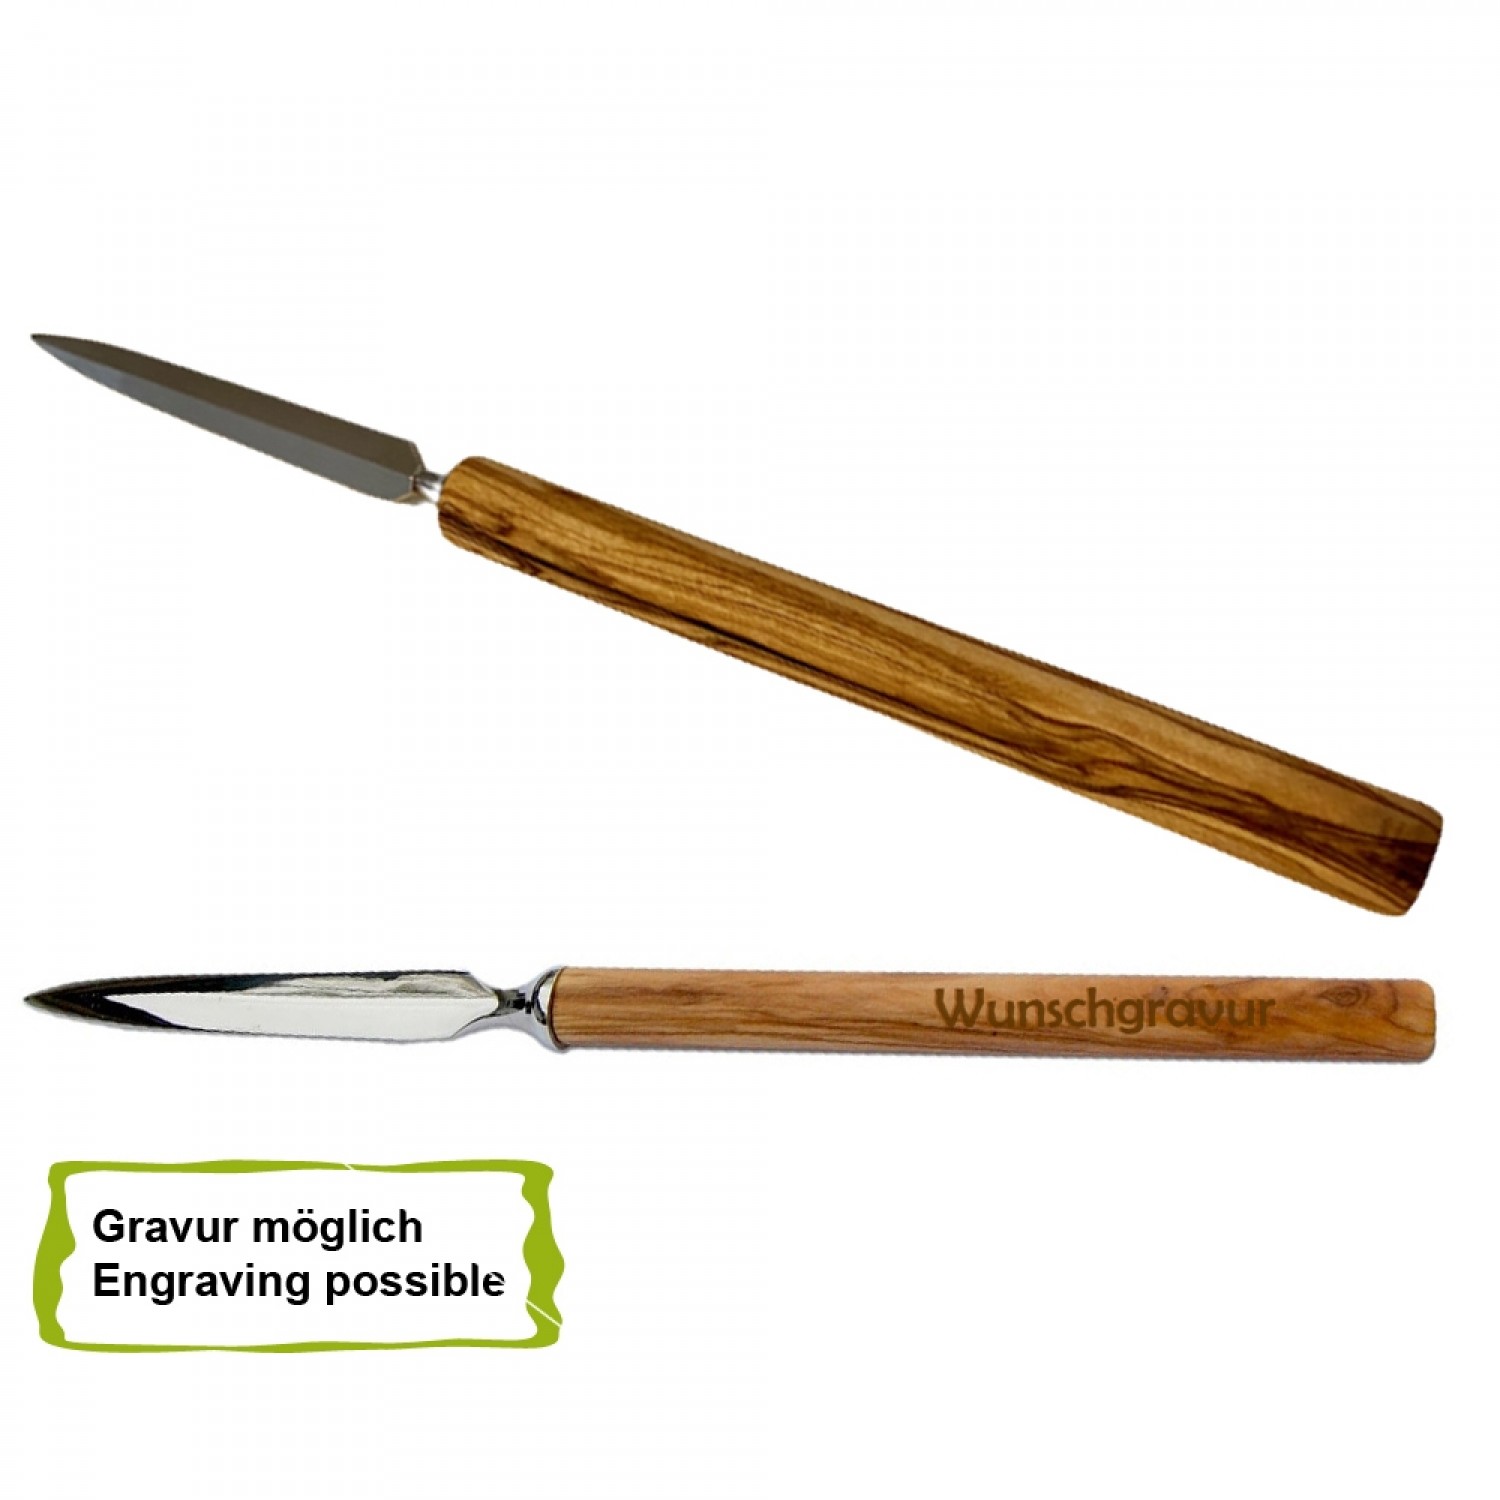 Paper Knife with Handle made of Olive Wood » D.O.M. 